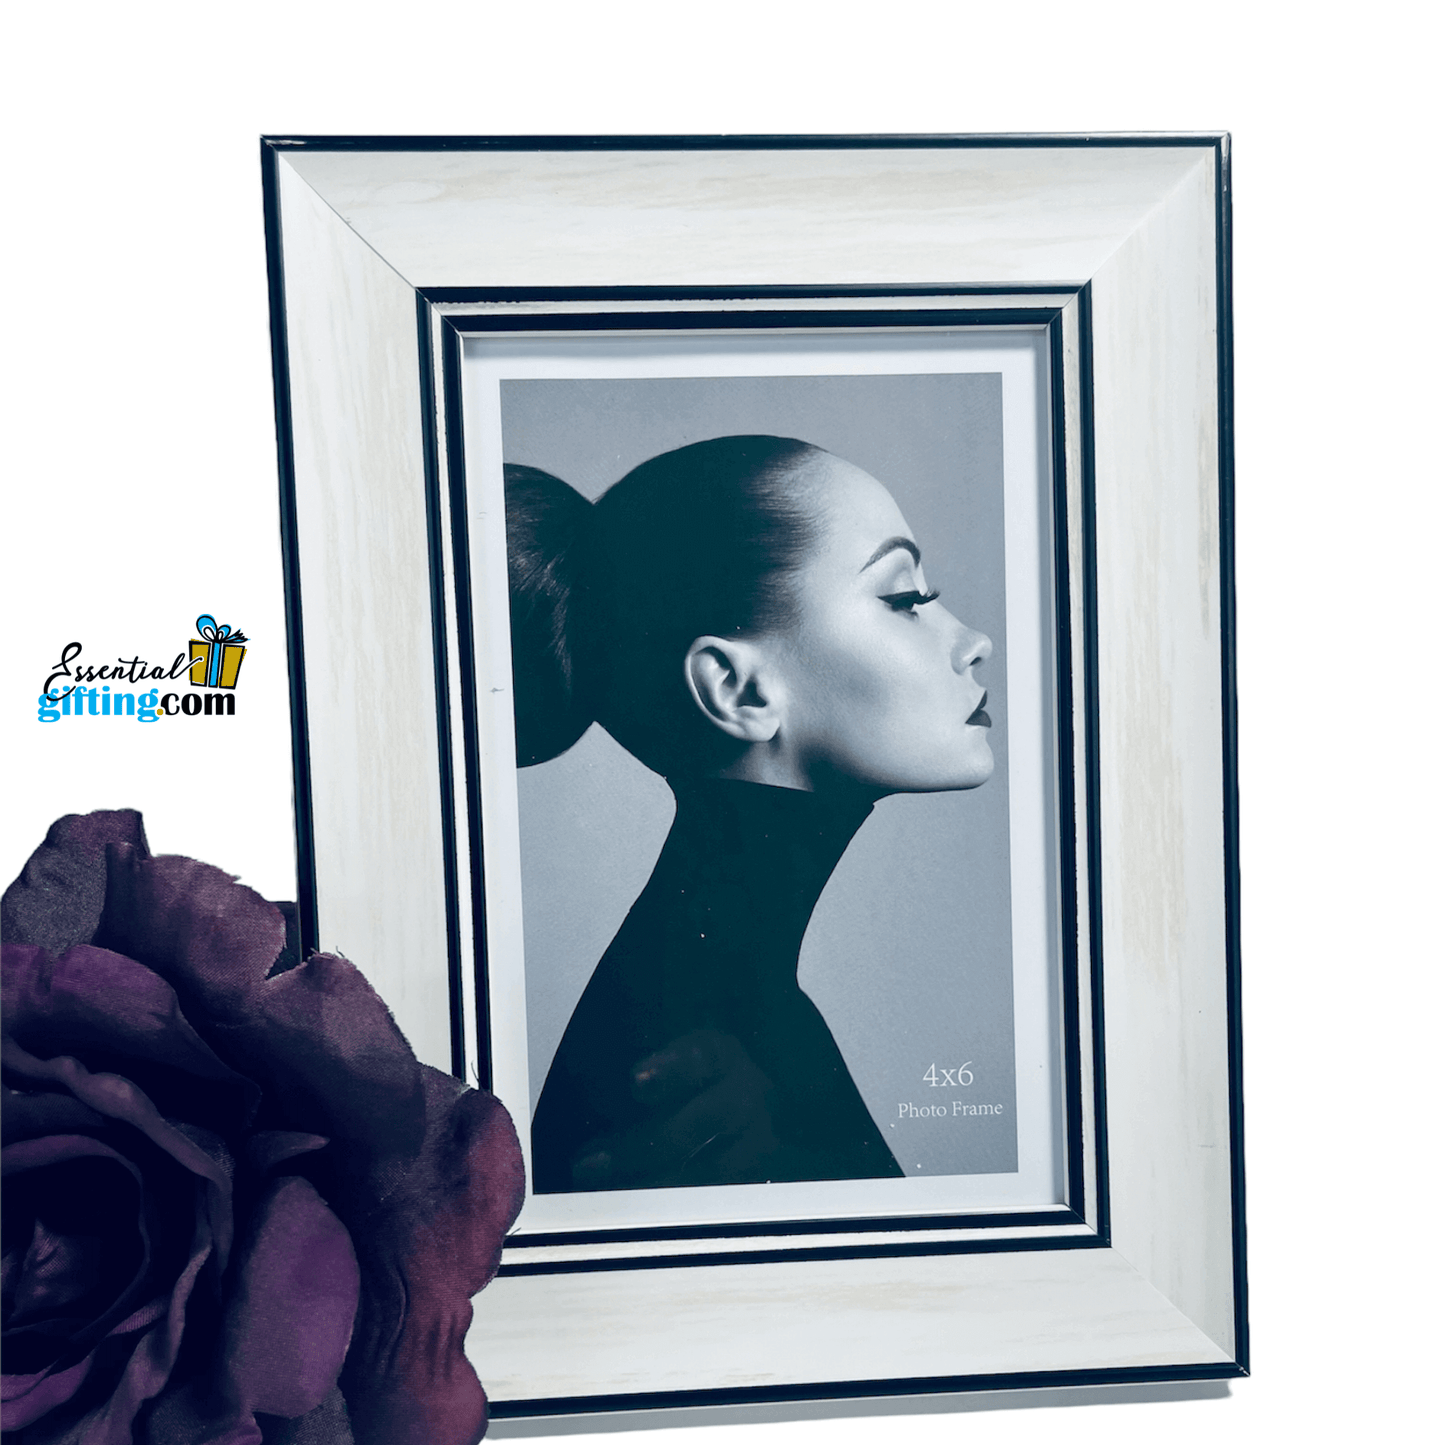 Elegant white wood photo frame (4x6) showcases a striking black and white profile portrait against a dark background, complemented by a lush purple flower.